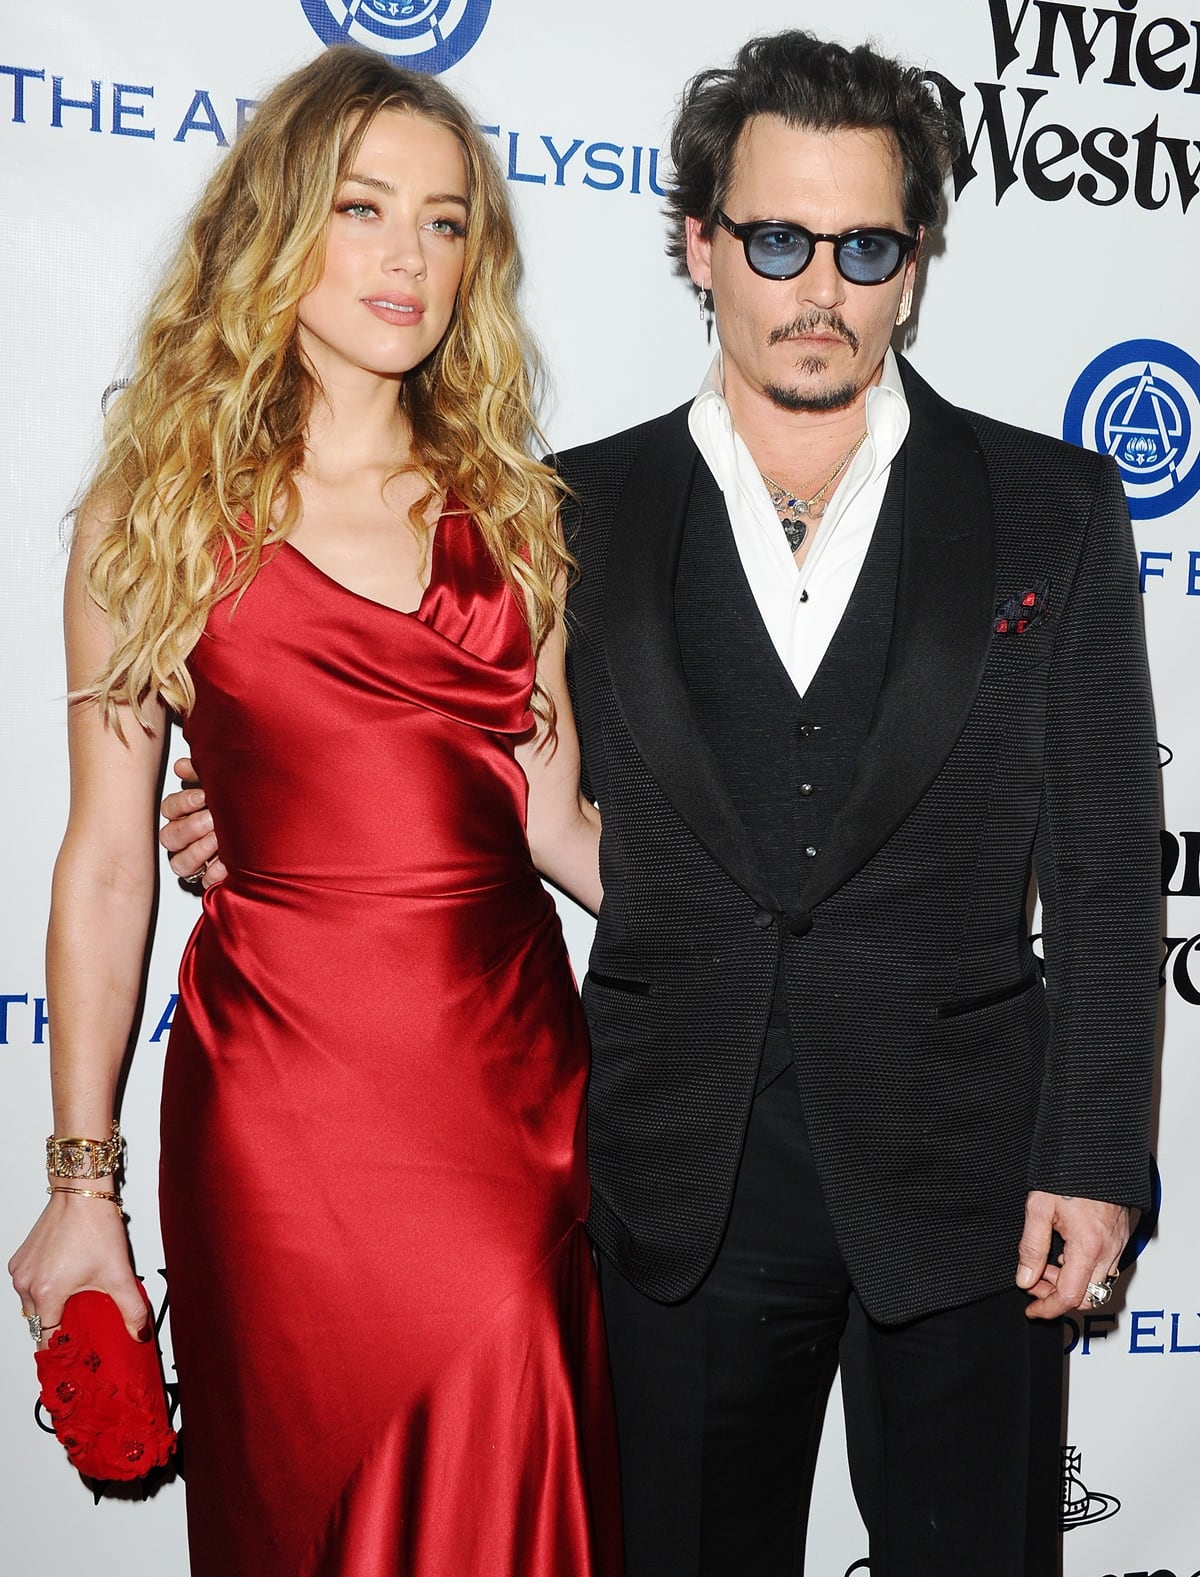 Johnny Depp sued his ex-wife Amber Heard in 2019 over an op-ed published in the Washington Post